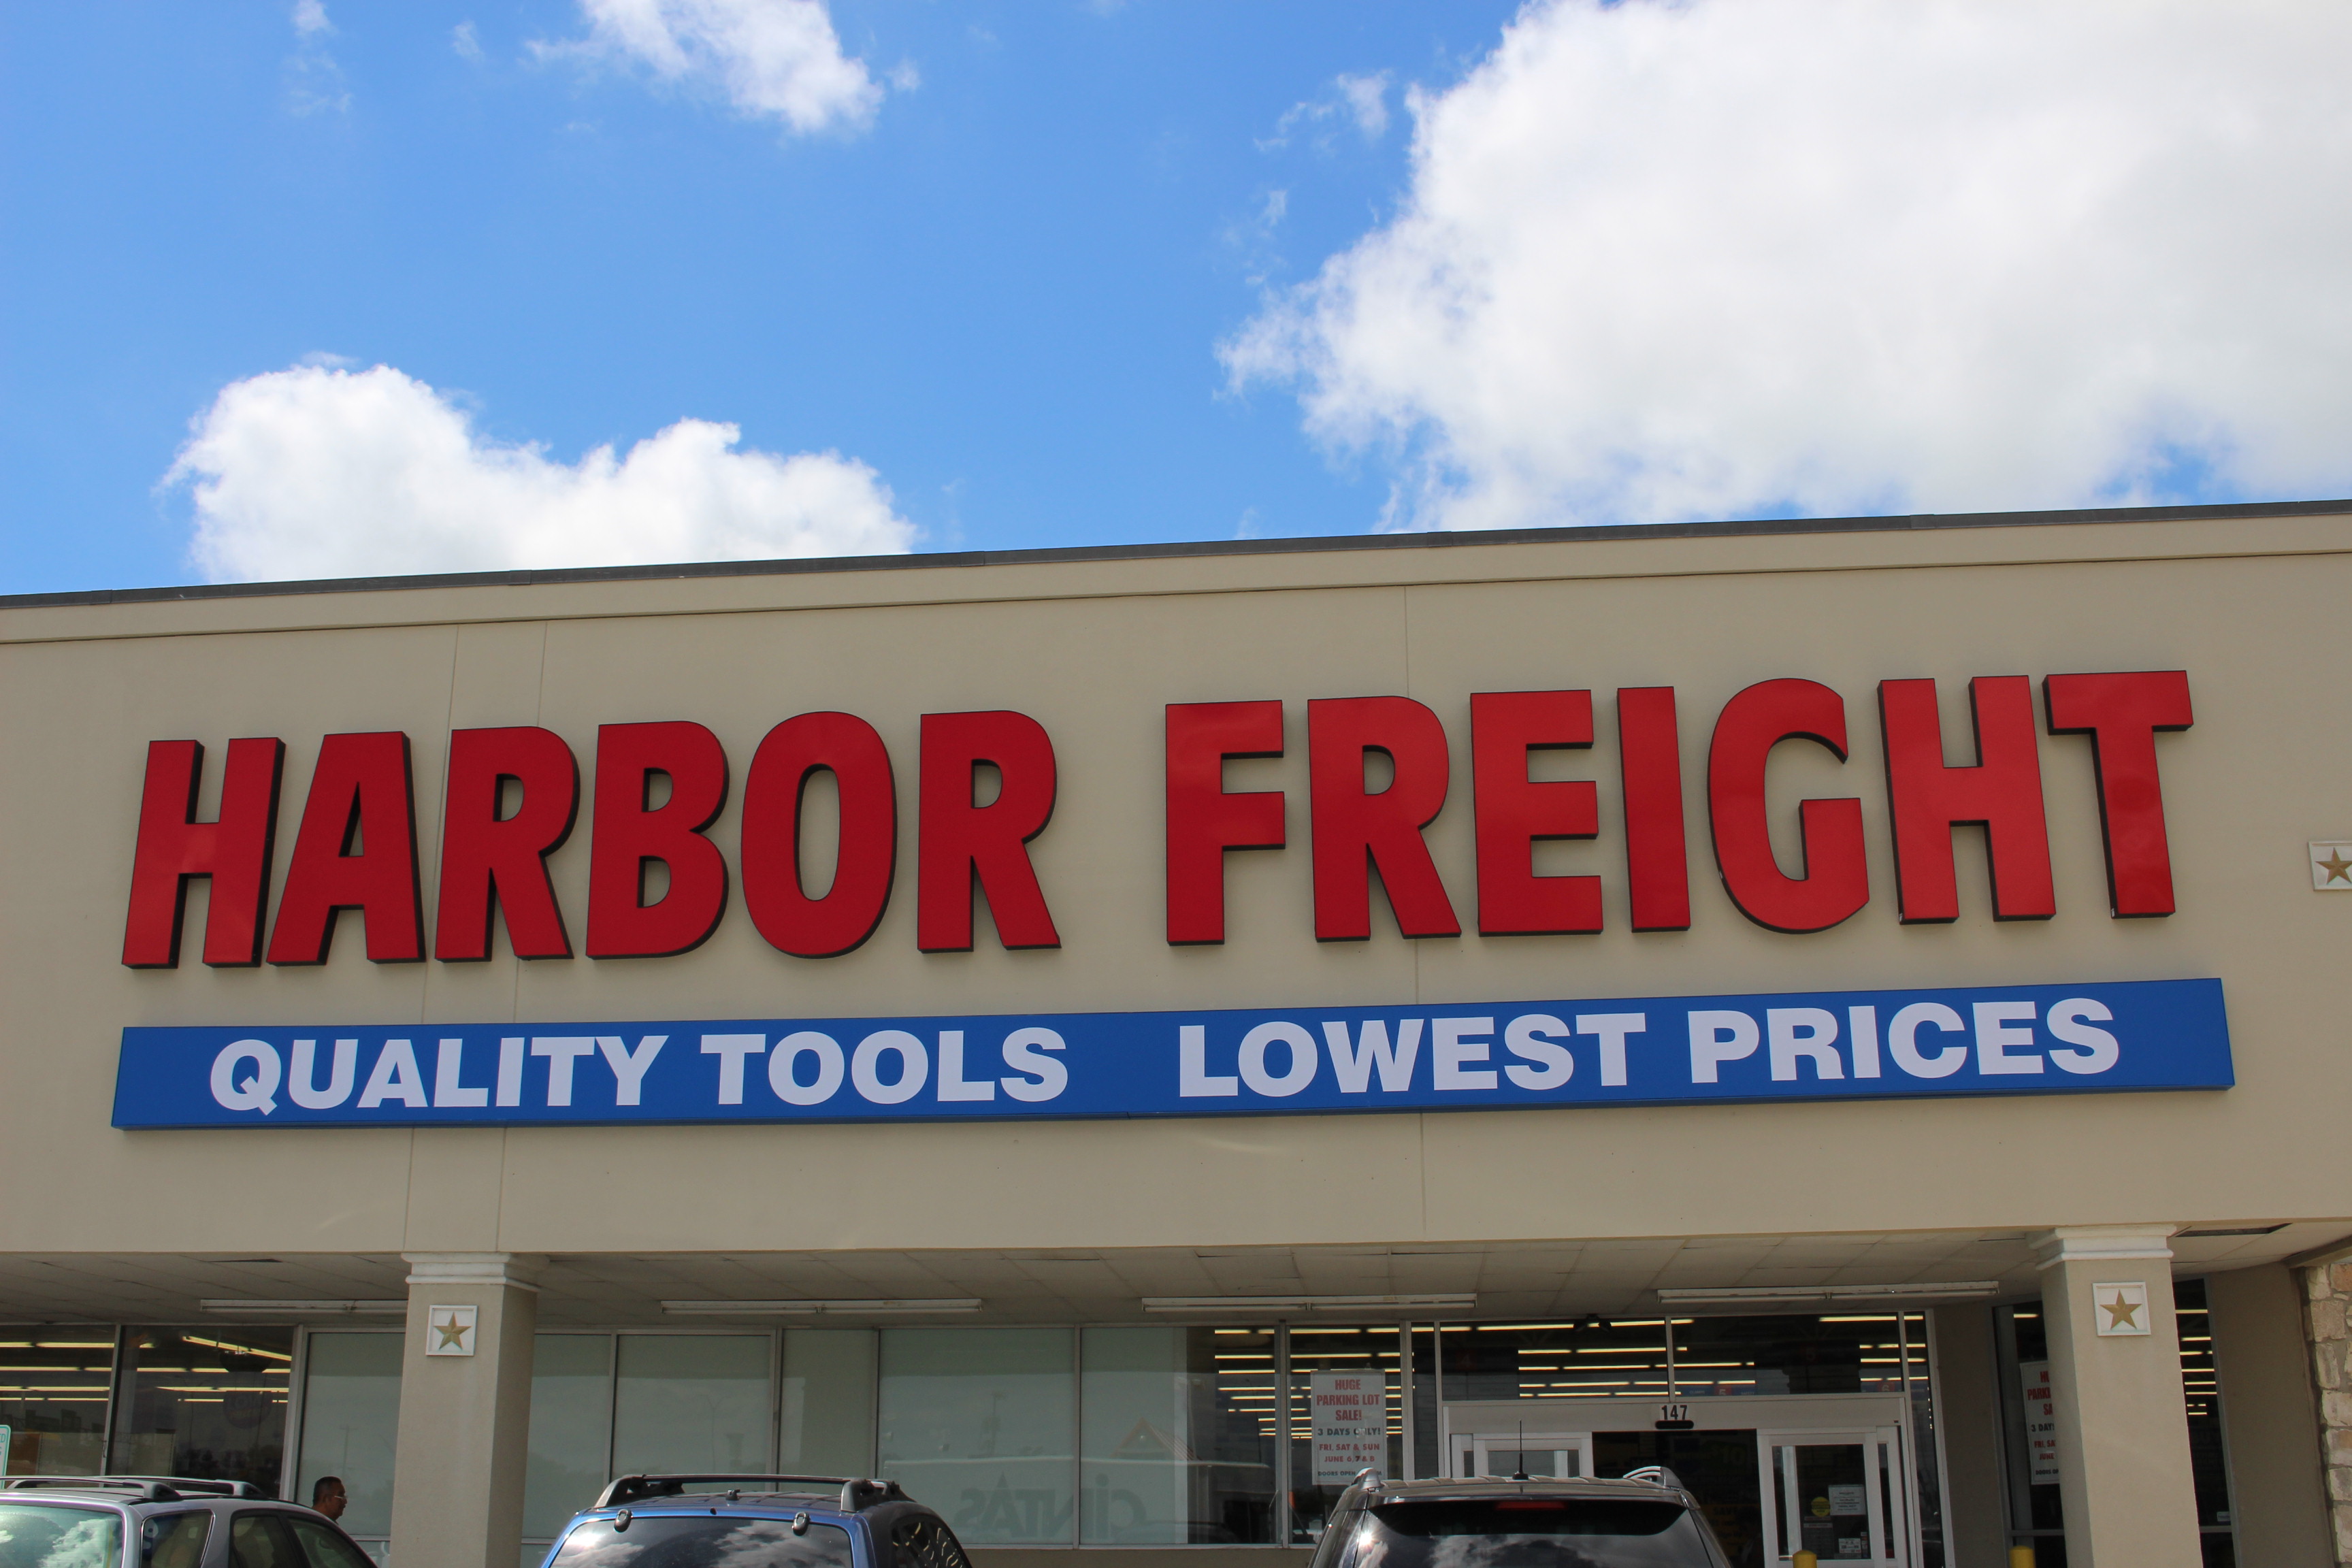 HARBOR FREIGHT HOURS | What Time Does Harbor Freight Close-Open?